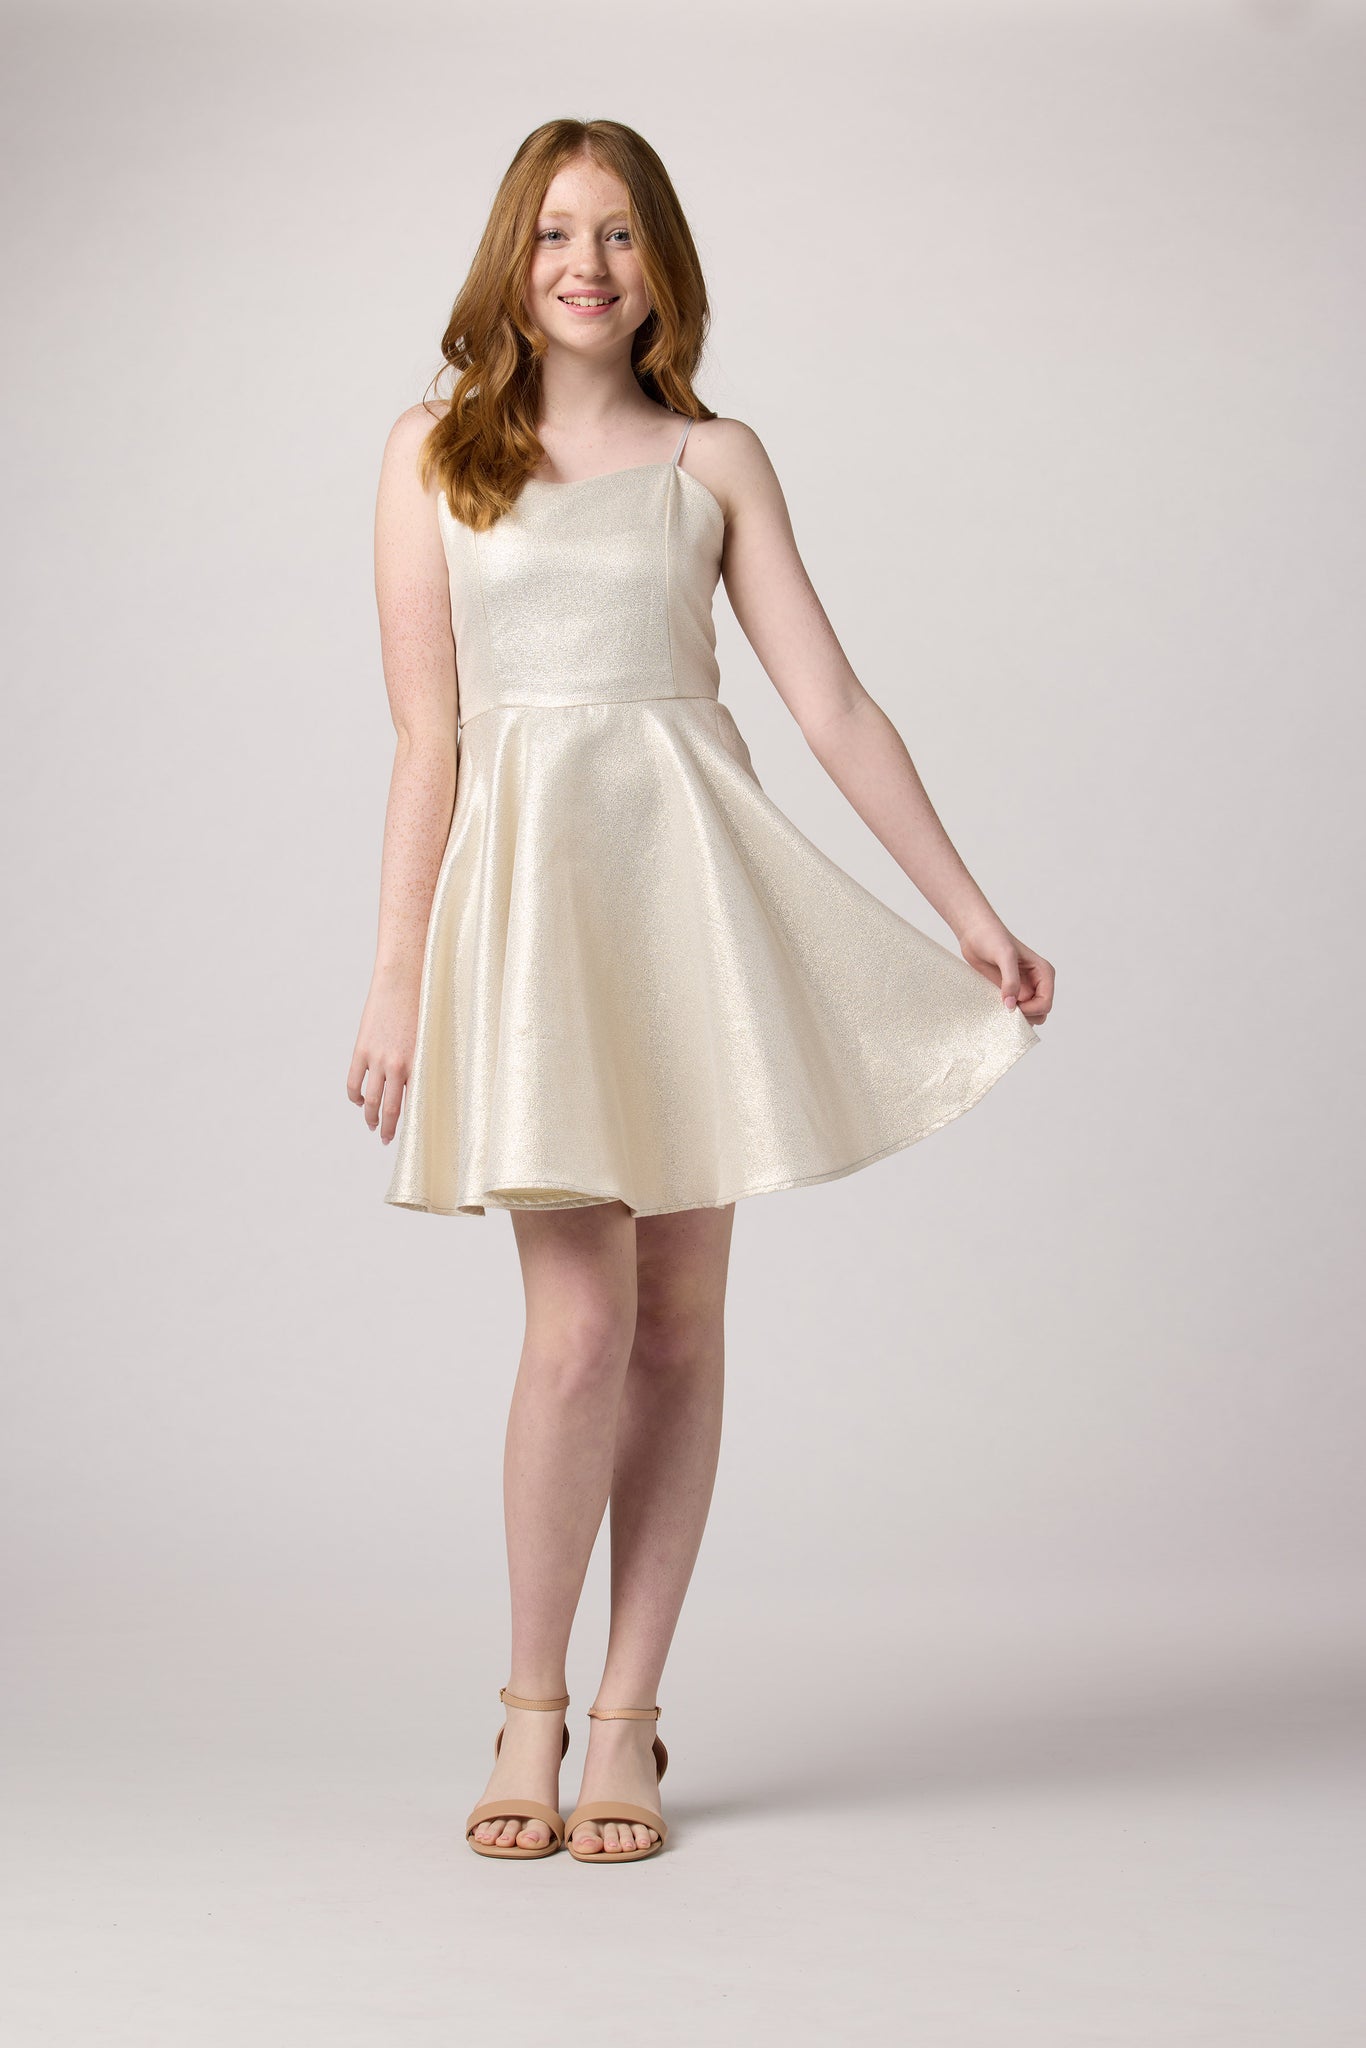 Red head in an Un Deux Ttois silver and ivory glitter fit and flare dress.